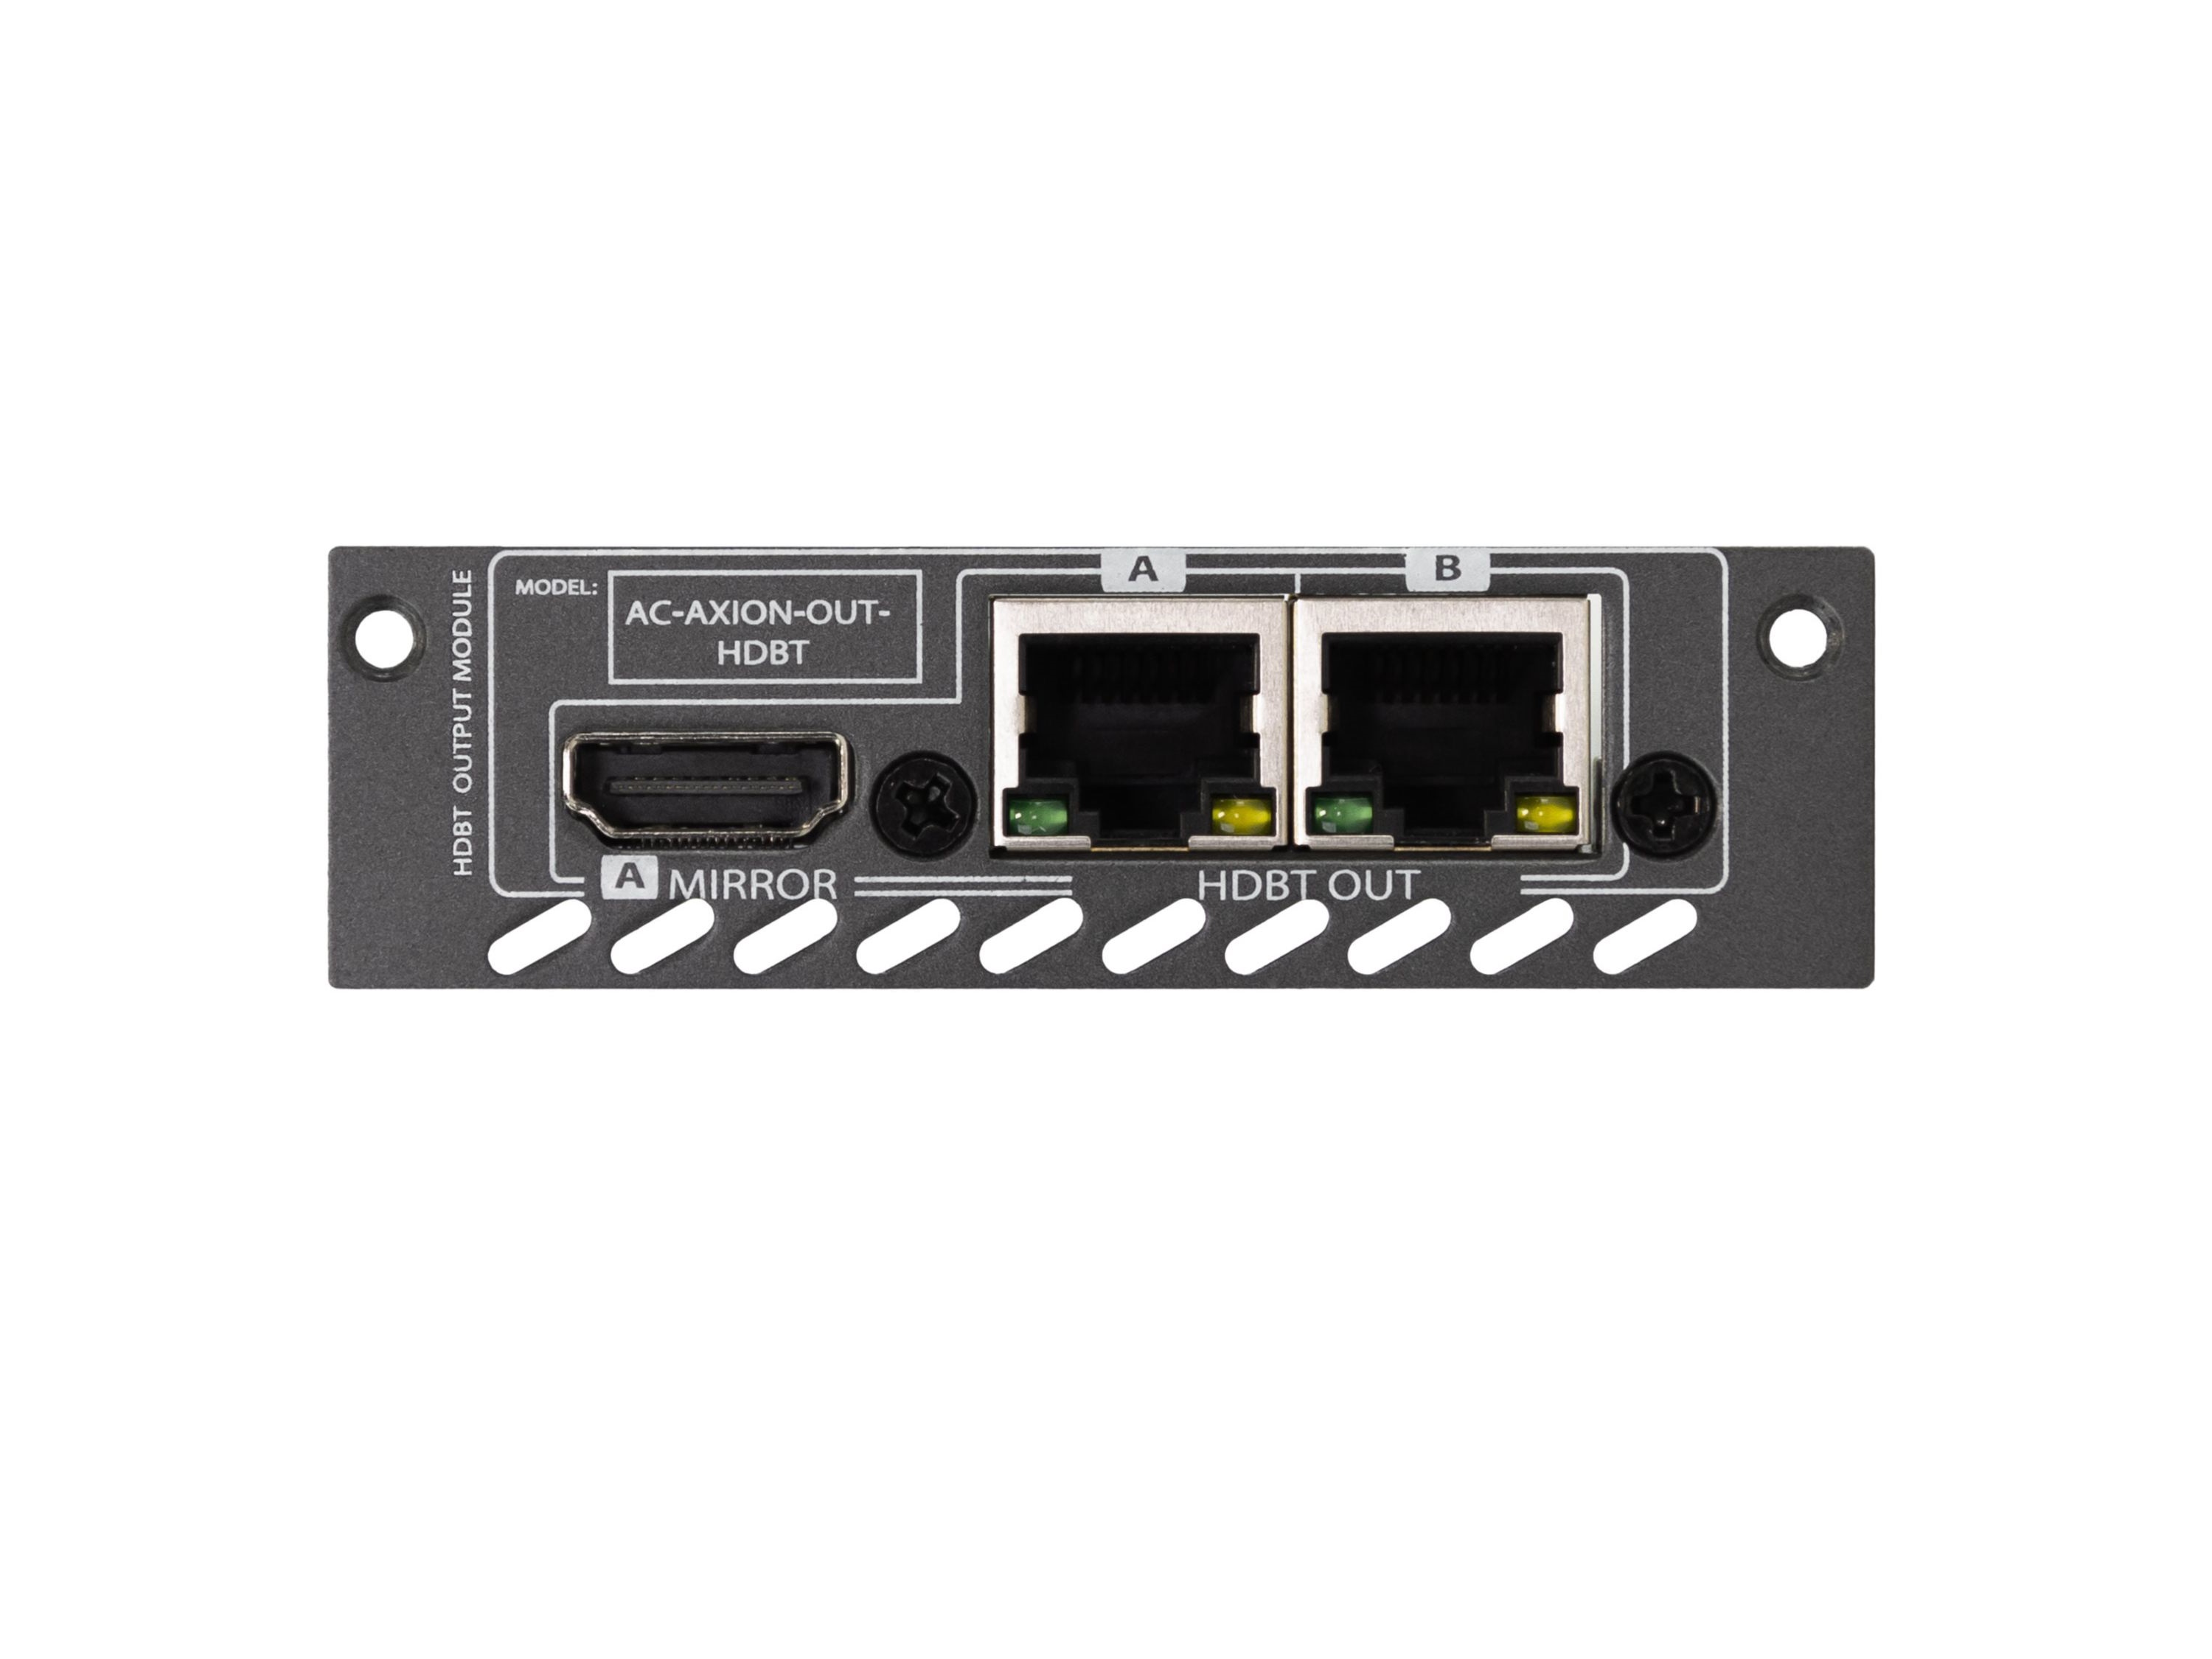 AVPro Edge AC-AXION-OUT-HDBT Dual 18Gbps ICT HDBaseT Output Ports with Single Mirrored HDMI Port Card